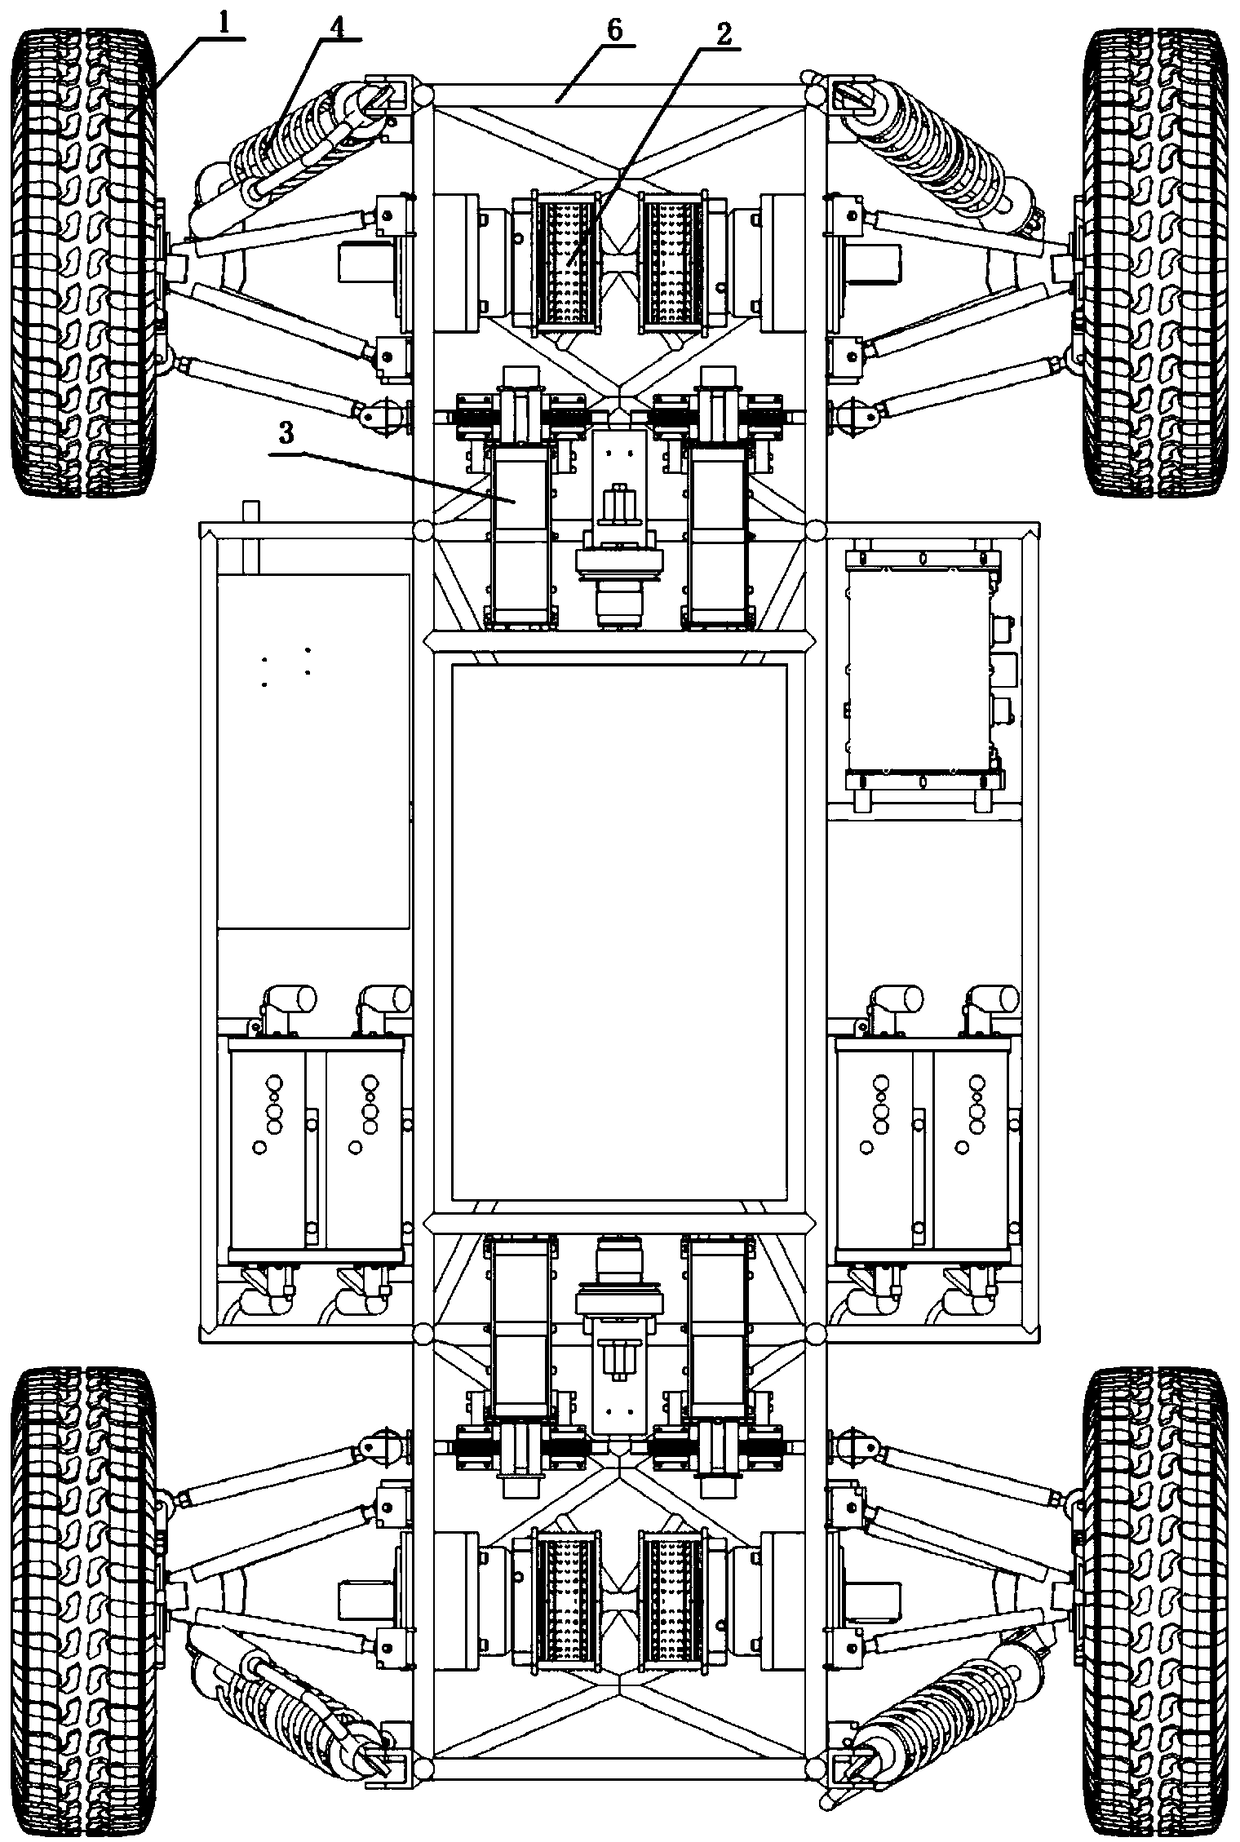 An all-wheel steering electrically powered unmanned vehicle chassis that is independently driven